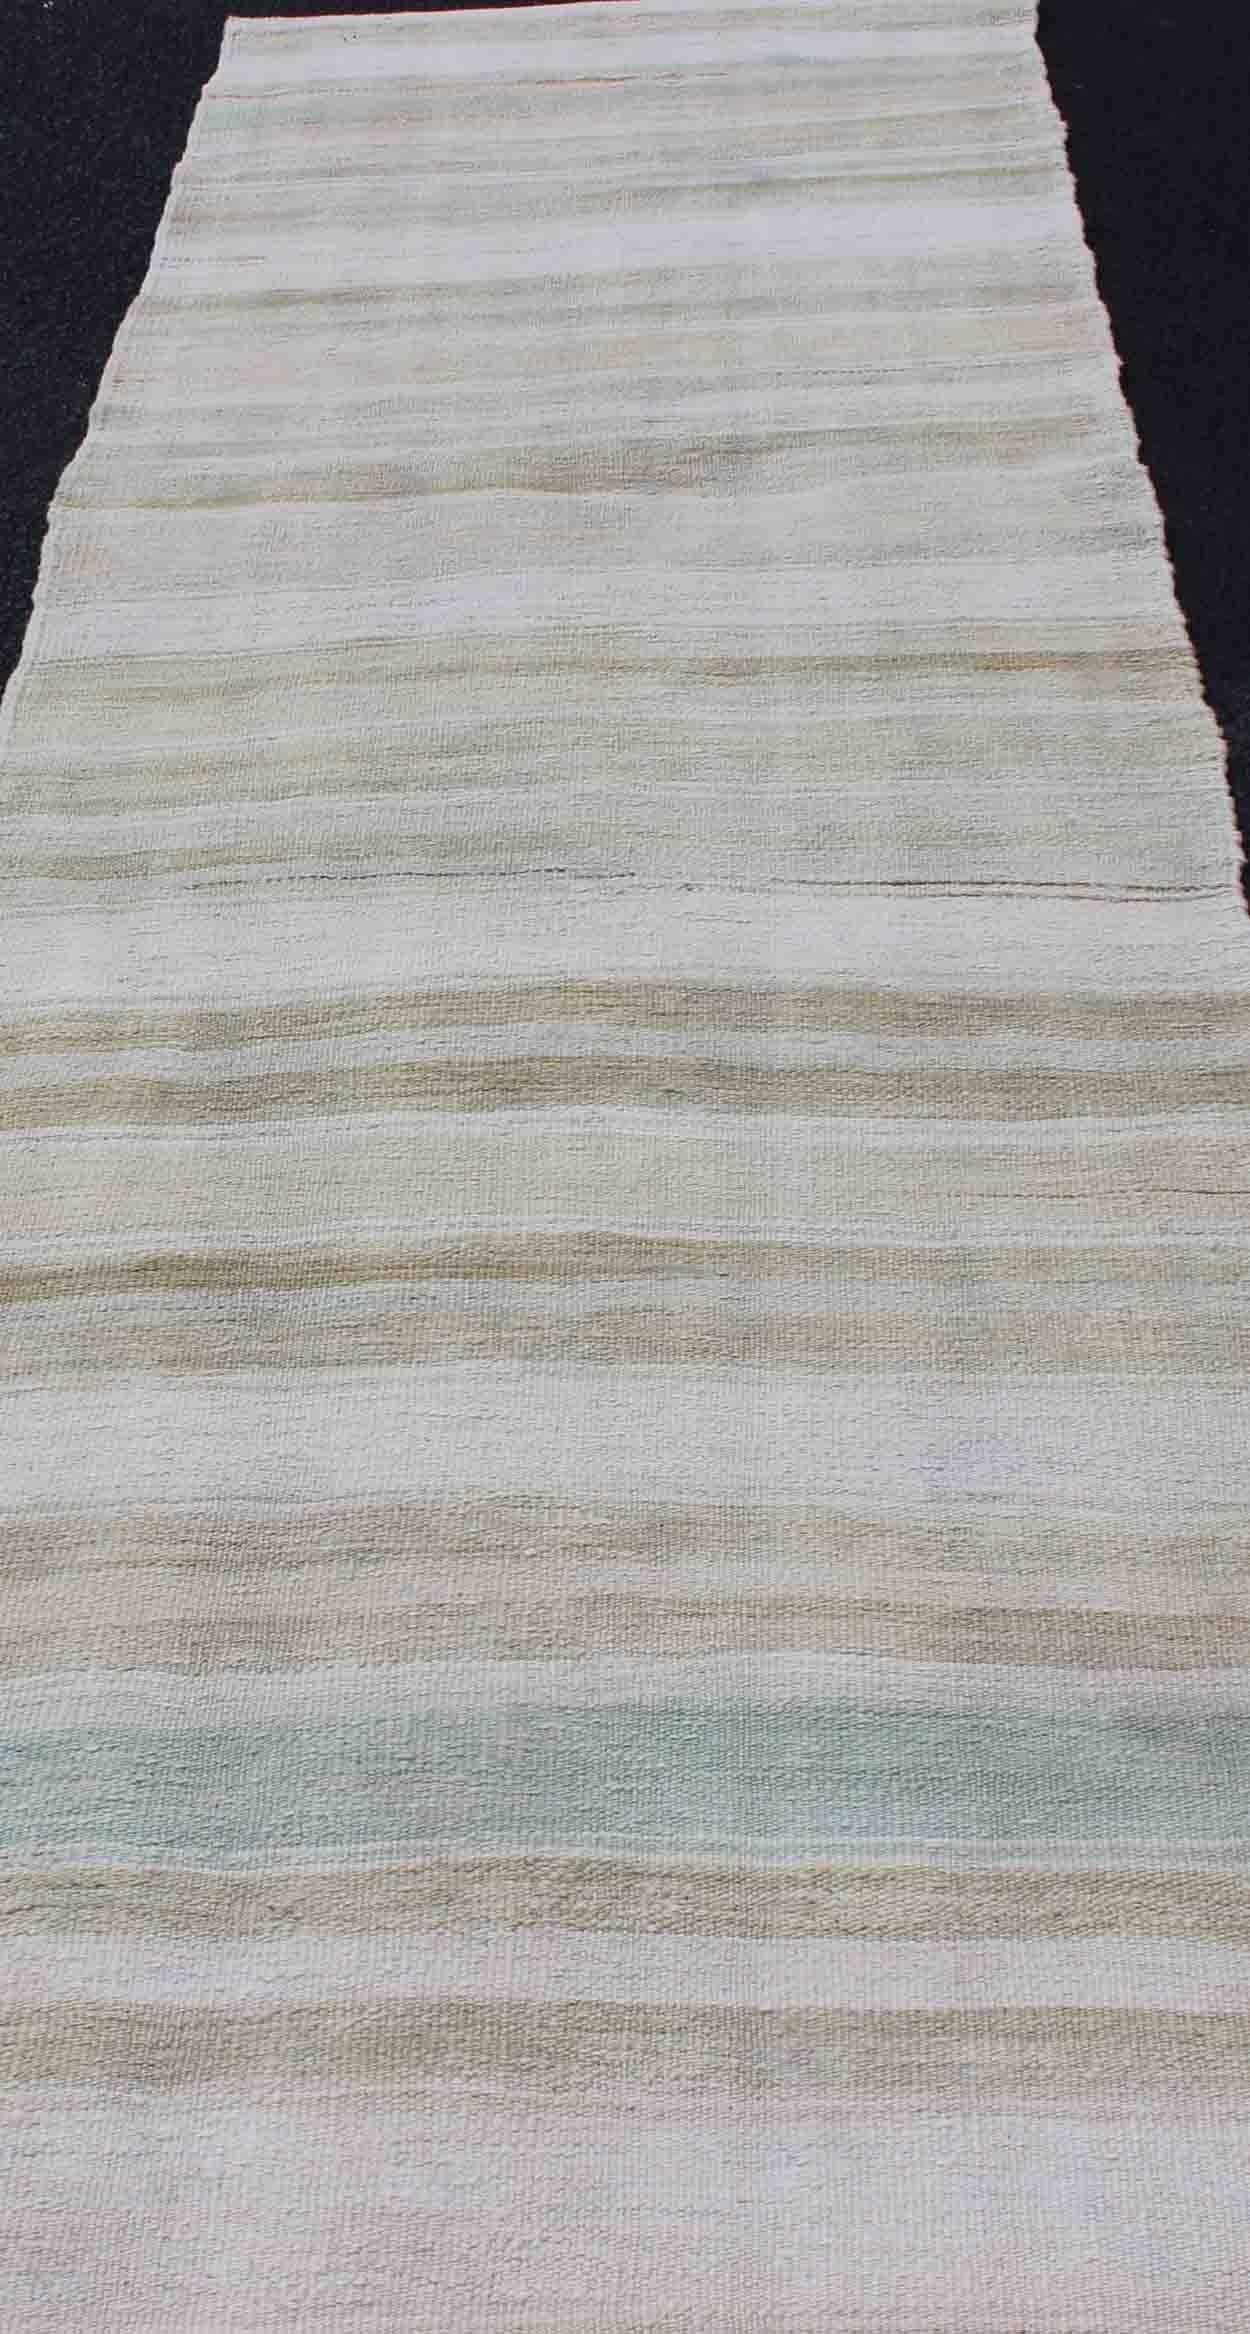 Hand-Woven Vintage Turkish Kilim Runner with Stripes and Modern Design in Muted Colors For Sale